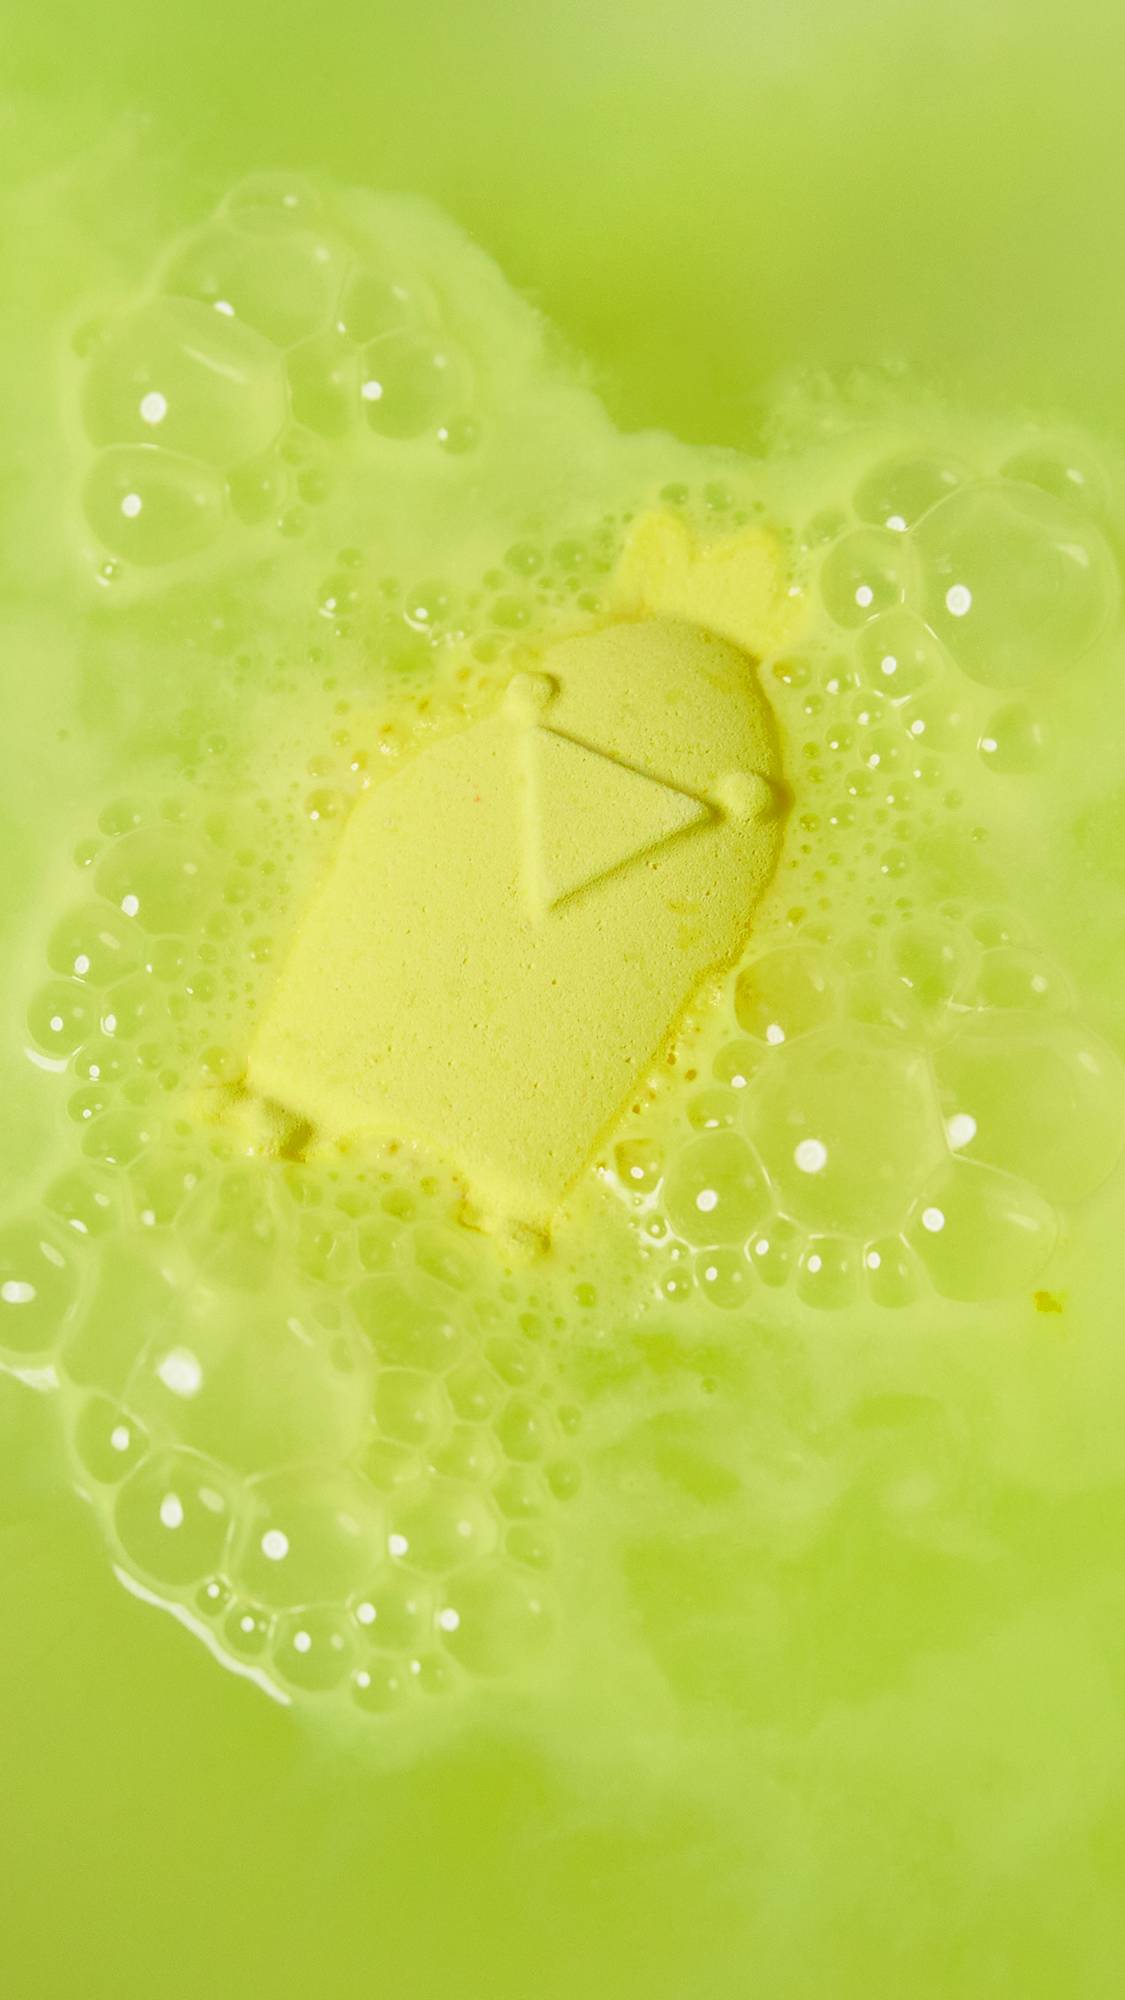 The Cheep Cheep bath bomb sits on top of the water fizzing bright, neon yellow foam.